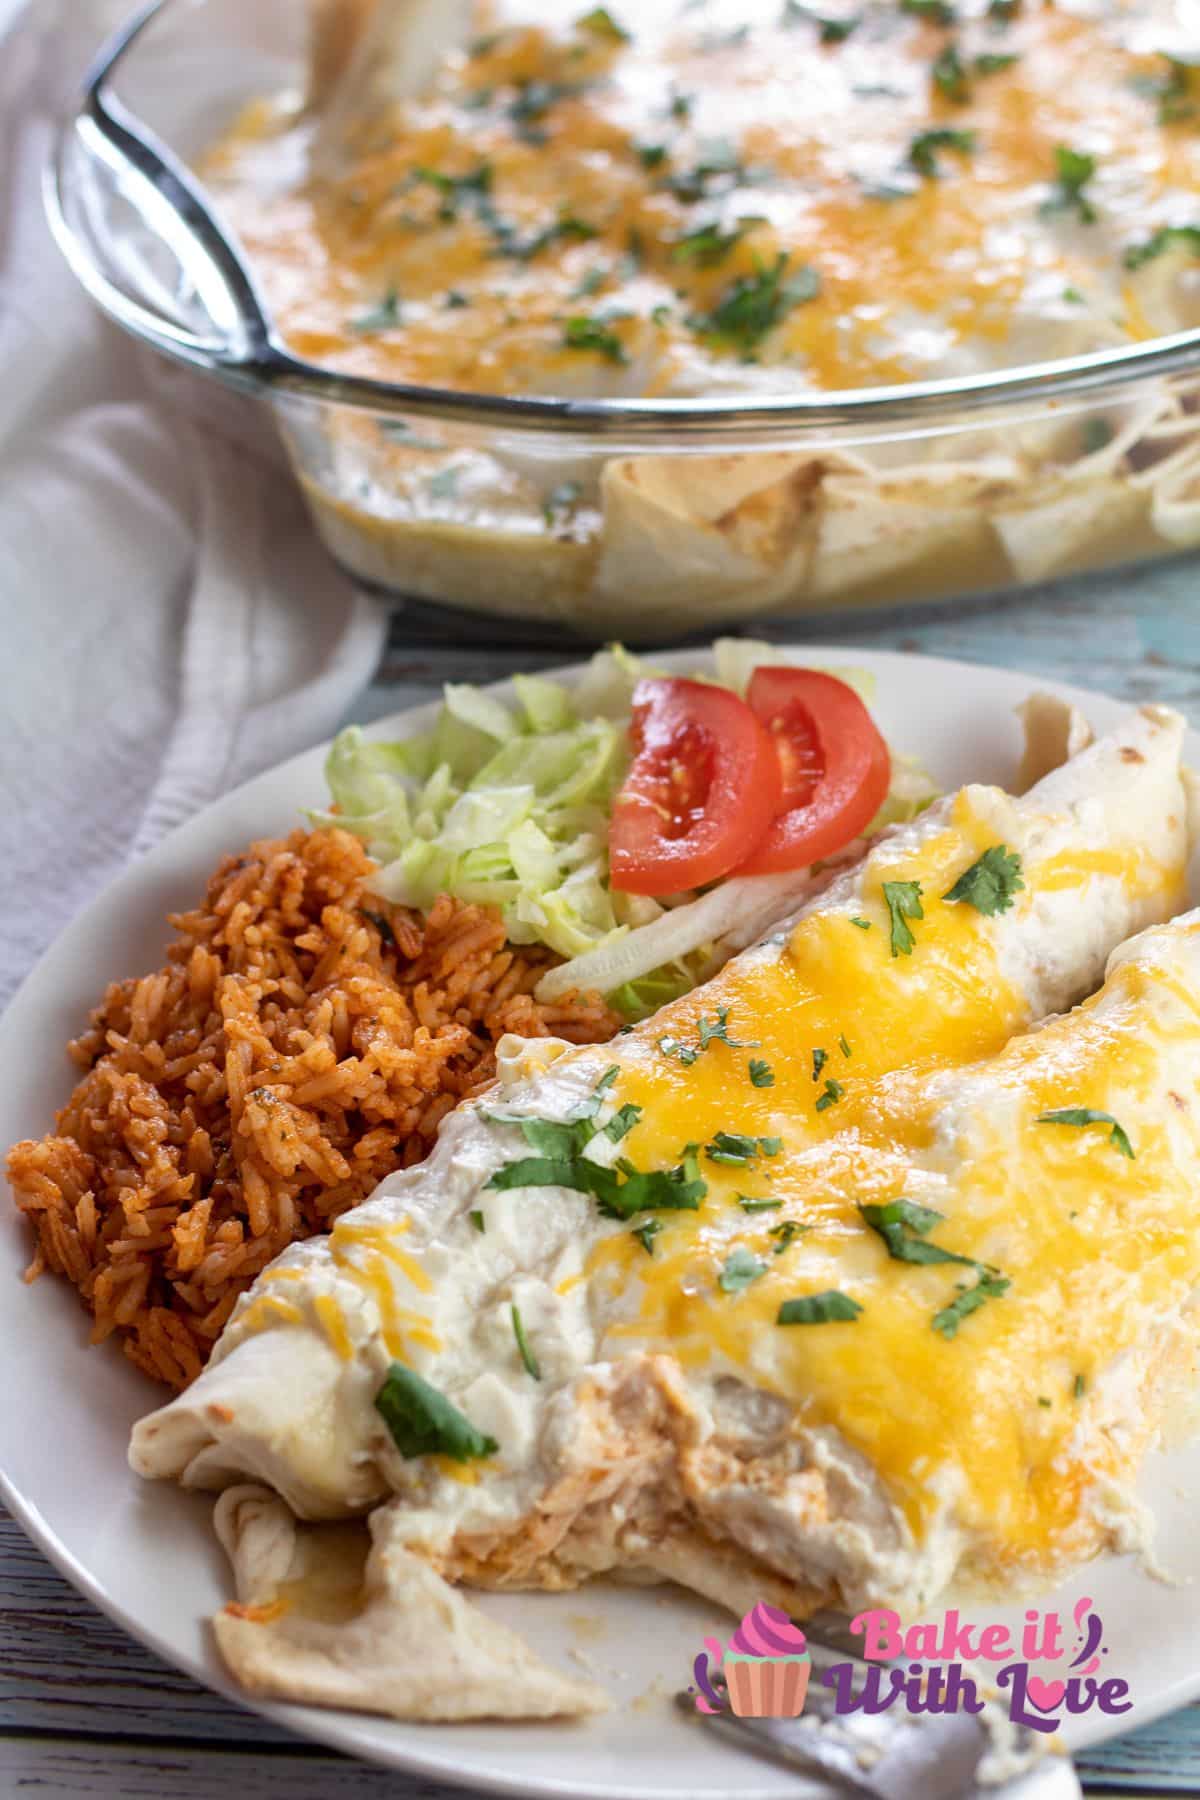 Tall image showing plate of sour cream enchiladas.